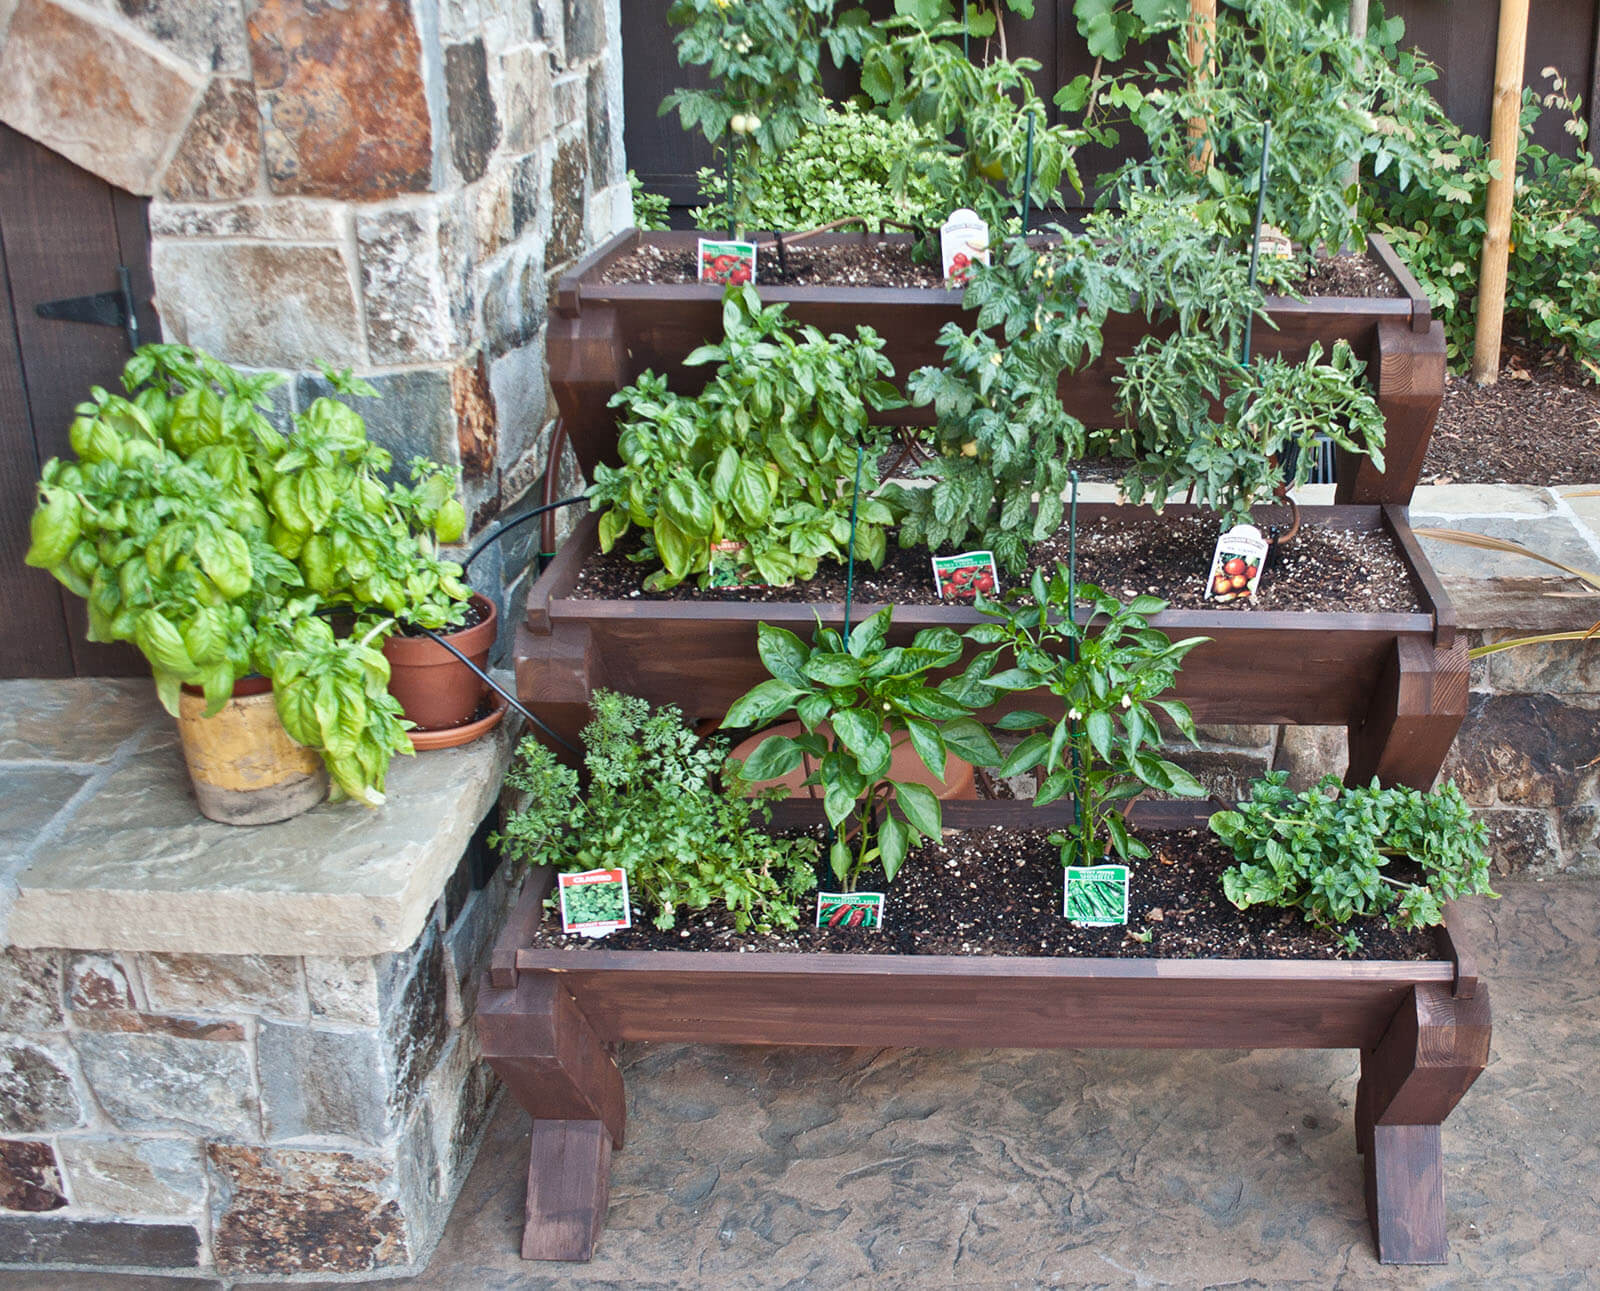 Stacked gardening beds with lots of yummy food growing